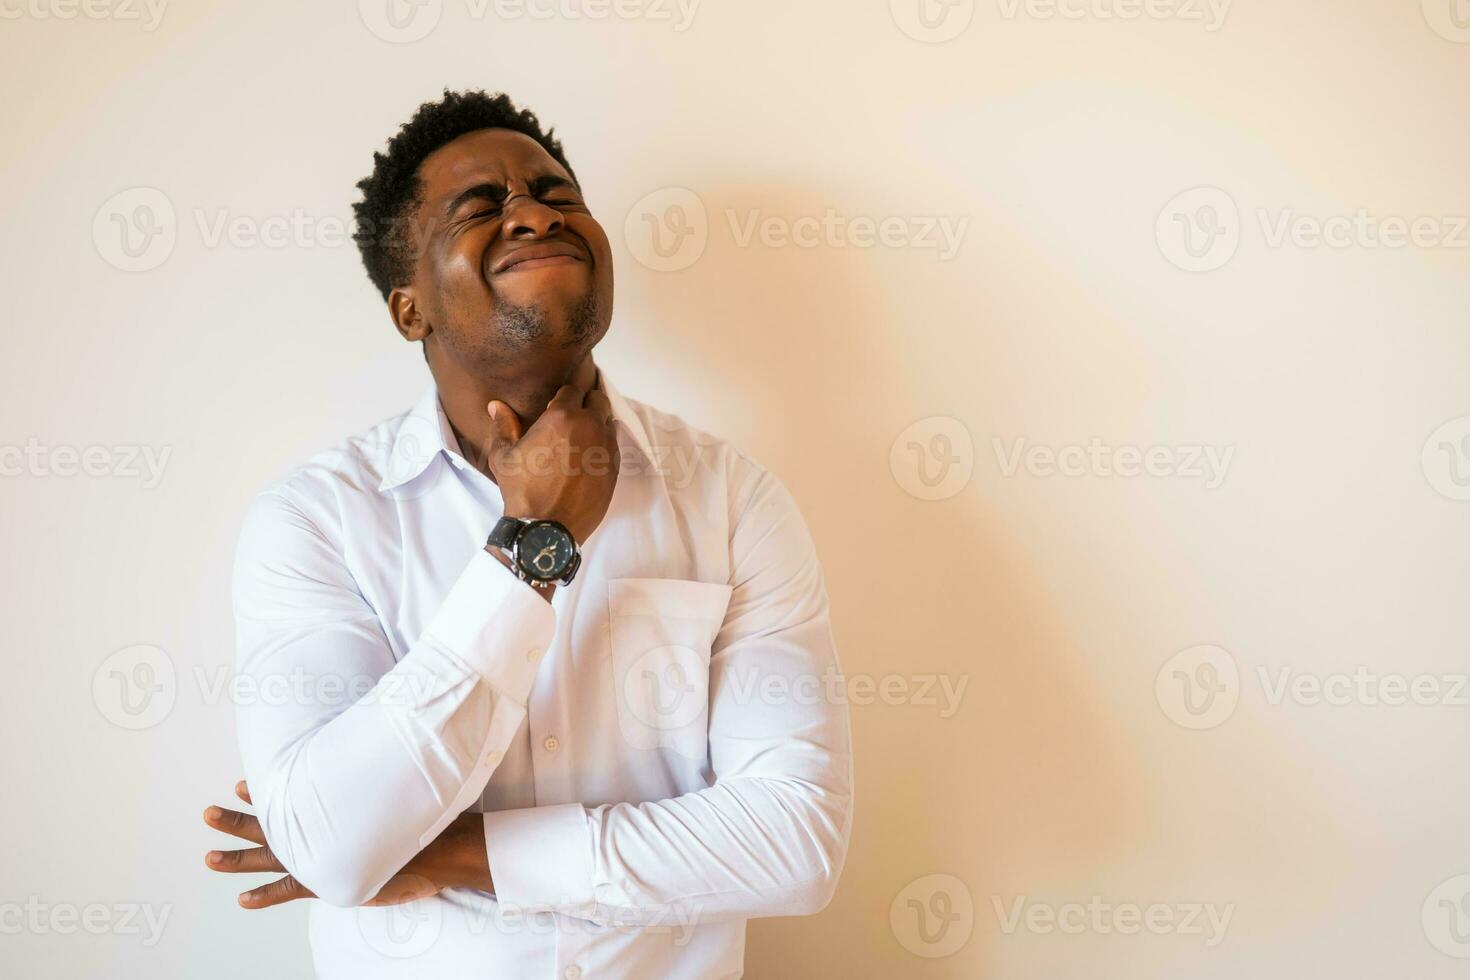 Portrait of young businessman who is having pain in his neck glands. Copy space on image for your text or advert. photo